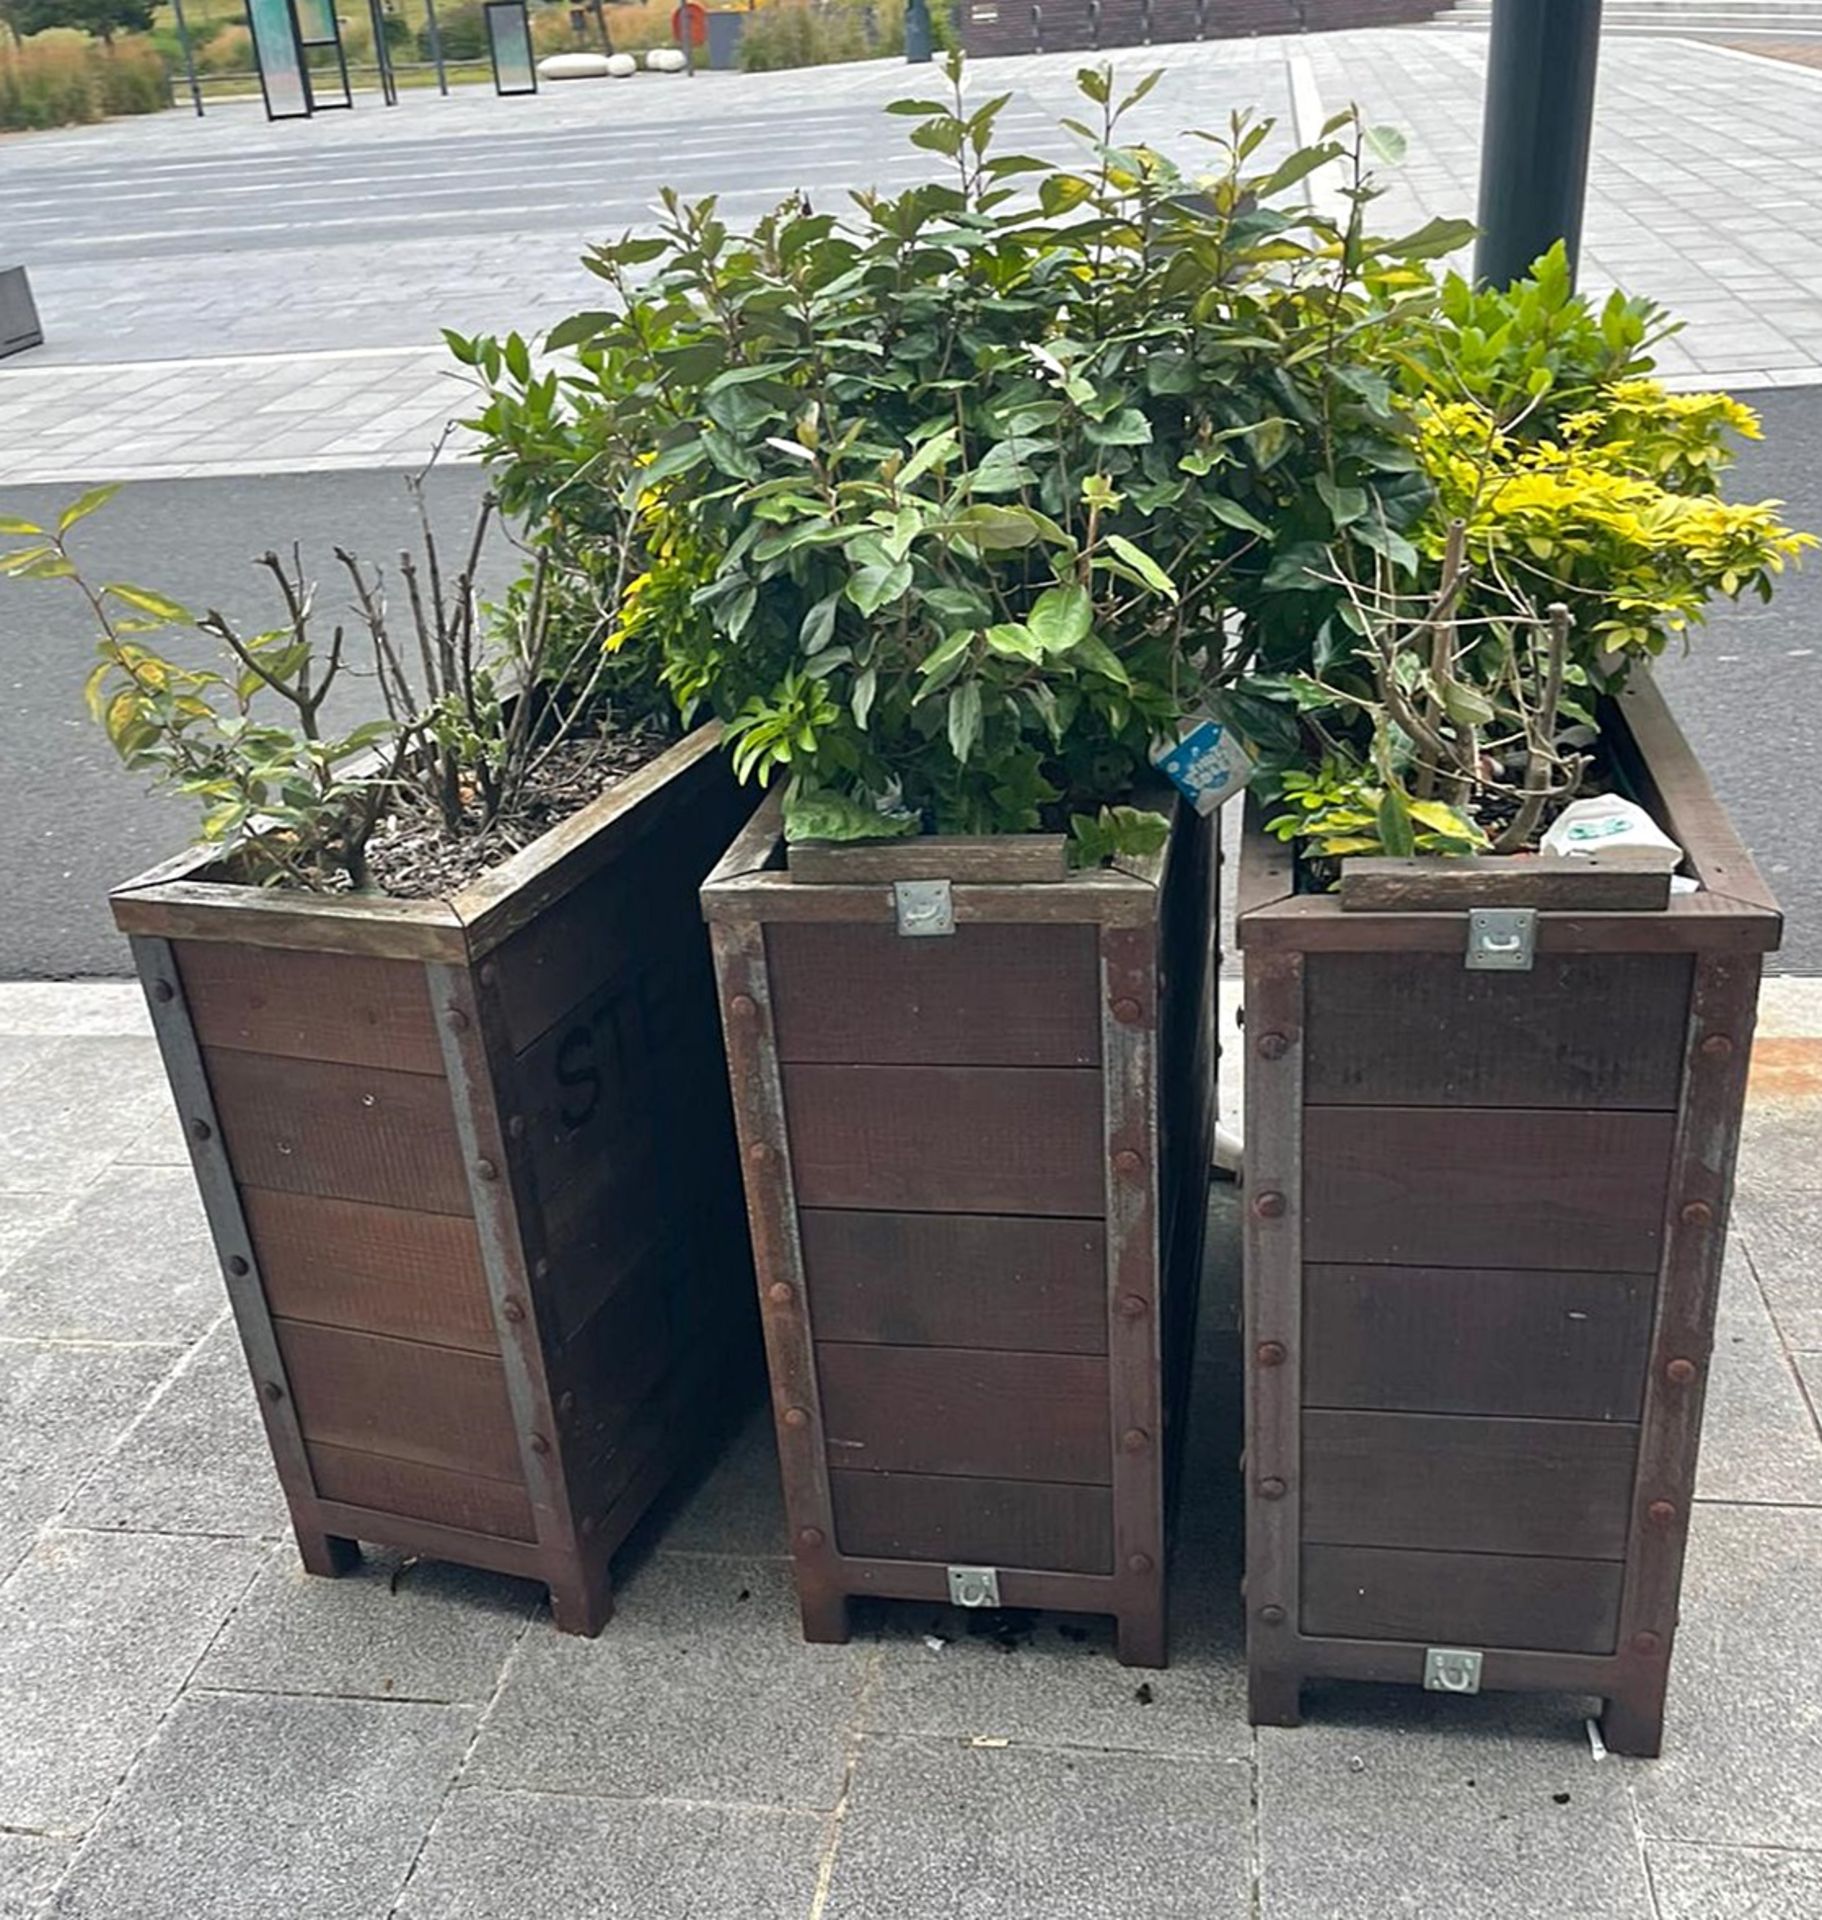 1 x Outdoor Wooden Planter With Live Plants - Size H90 x W121 x D41 cms - CL674 - Location: Telford, - Image 3 of 3